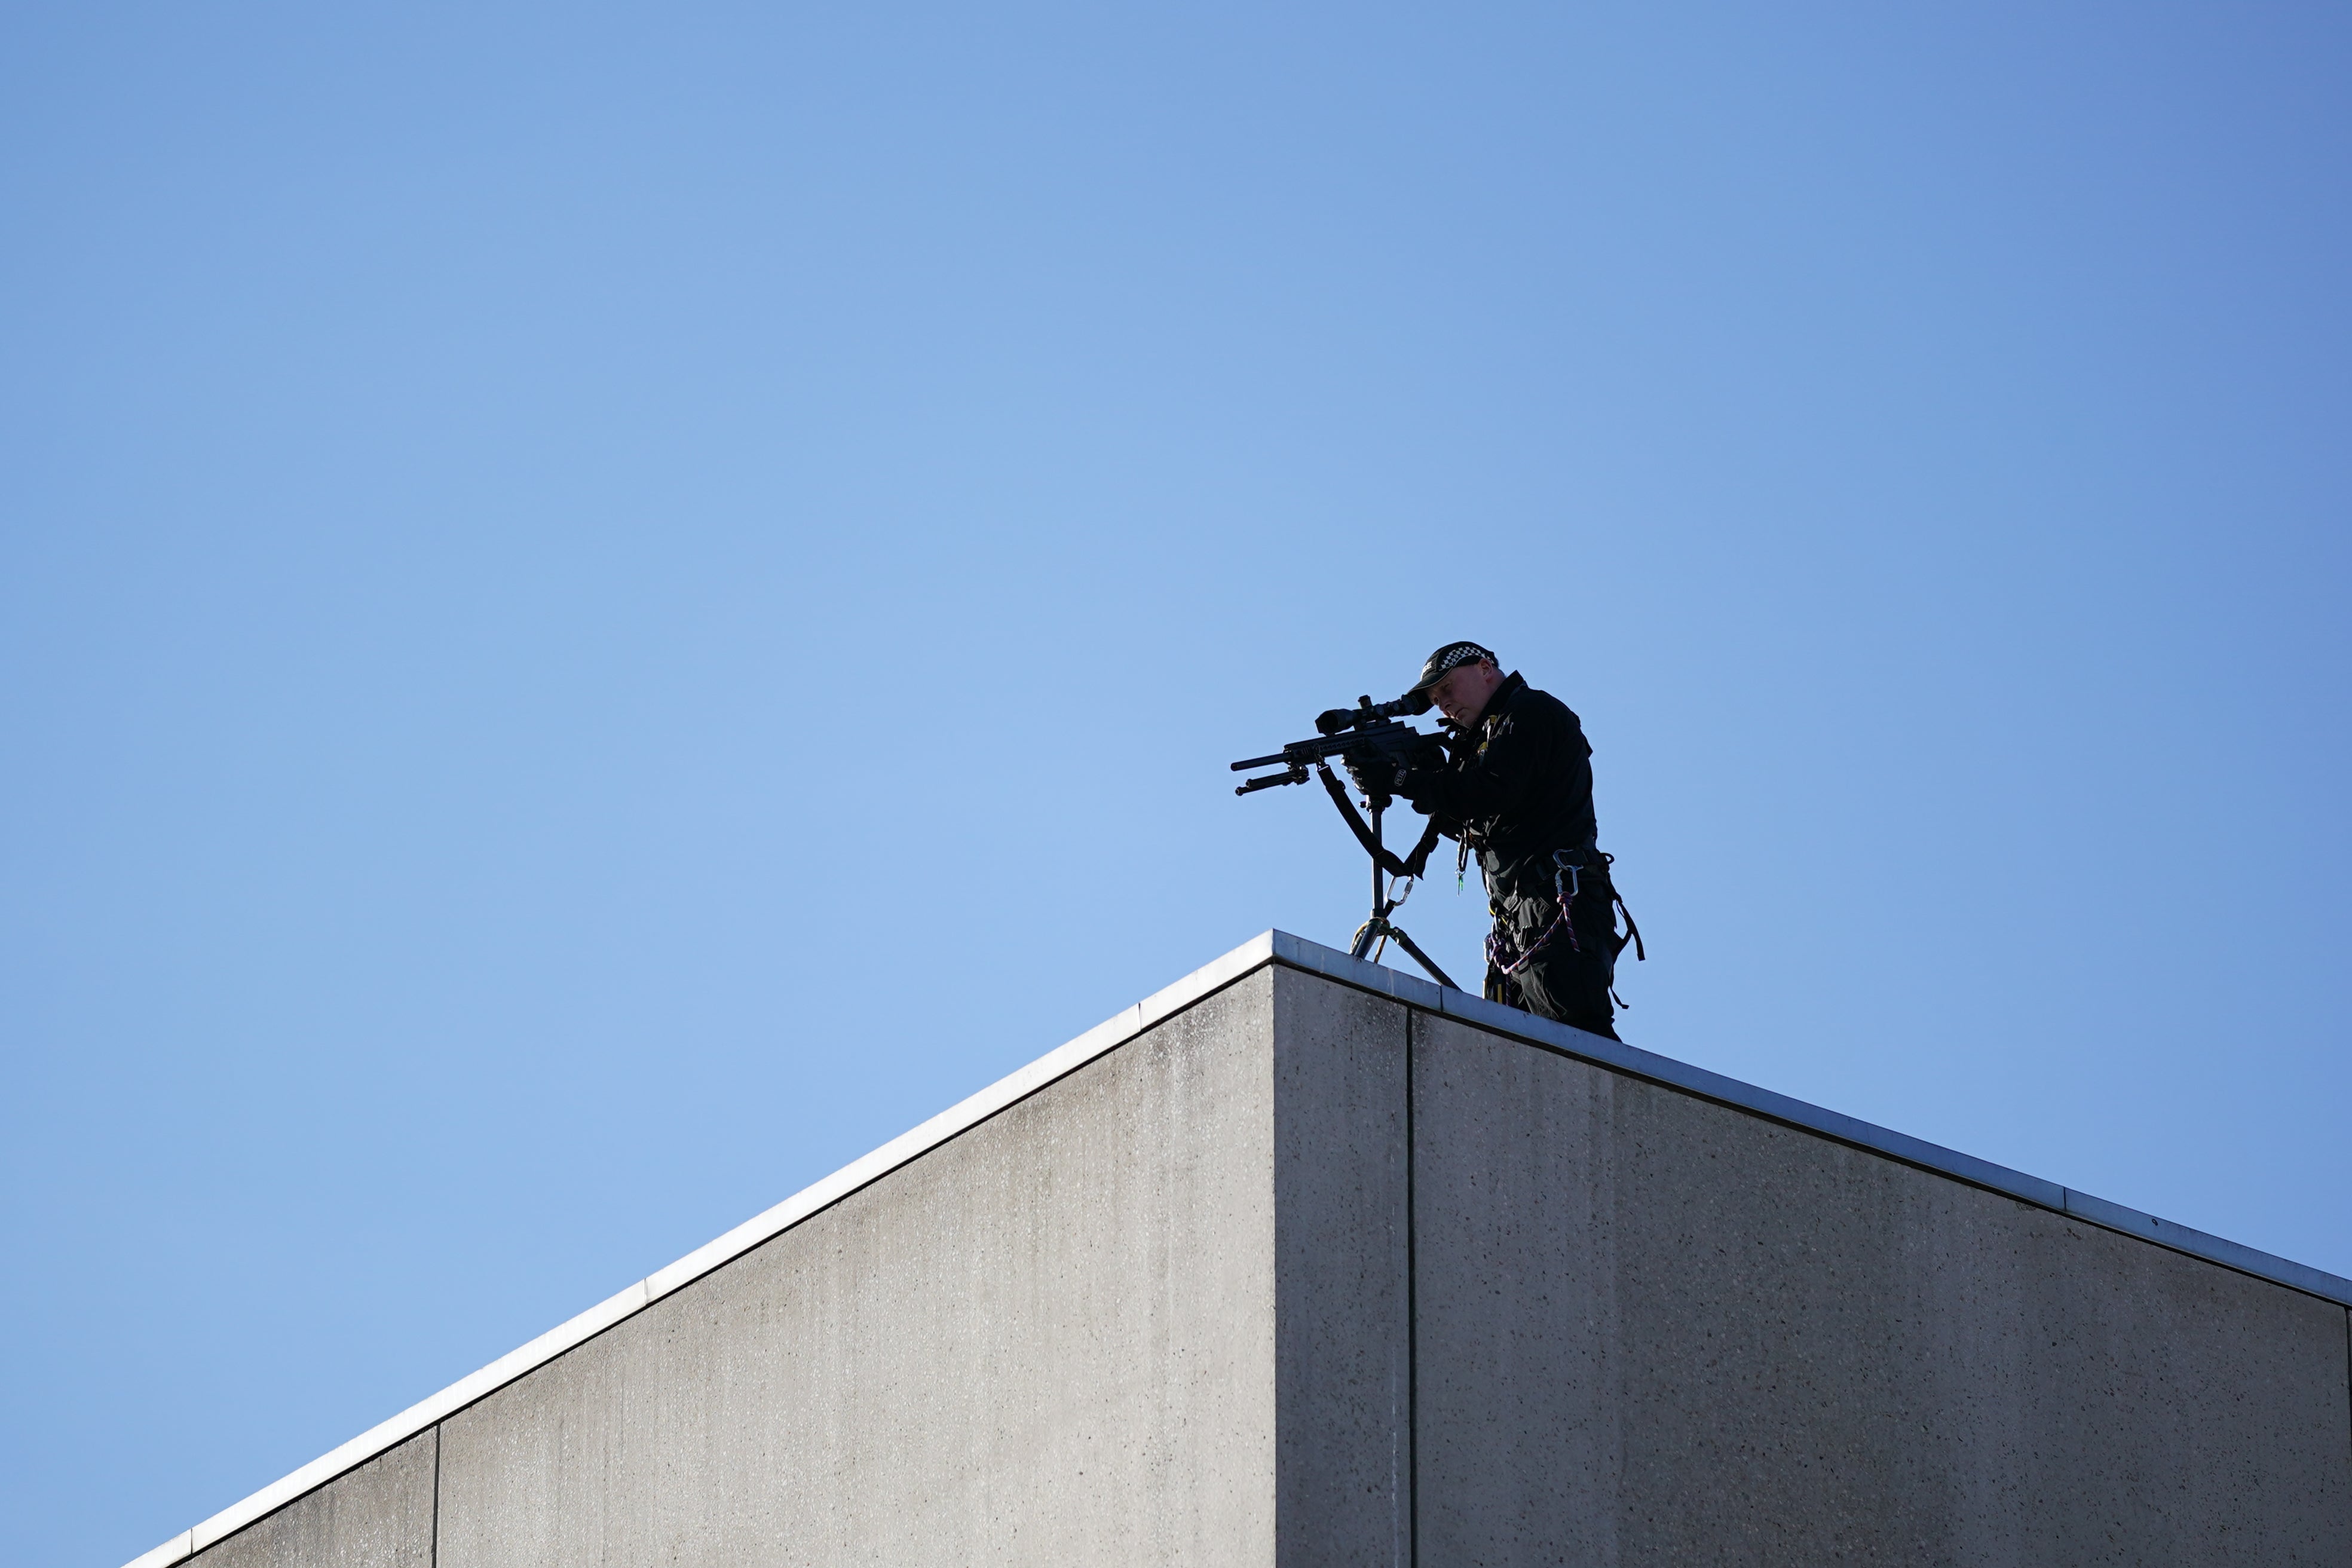 A police sniper watches over the Palace of Holyroodhouse